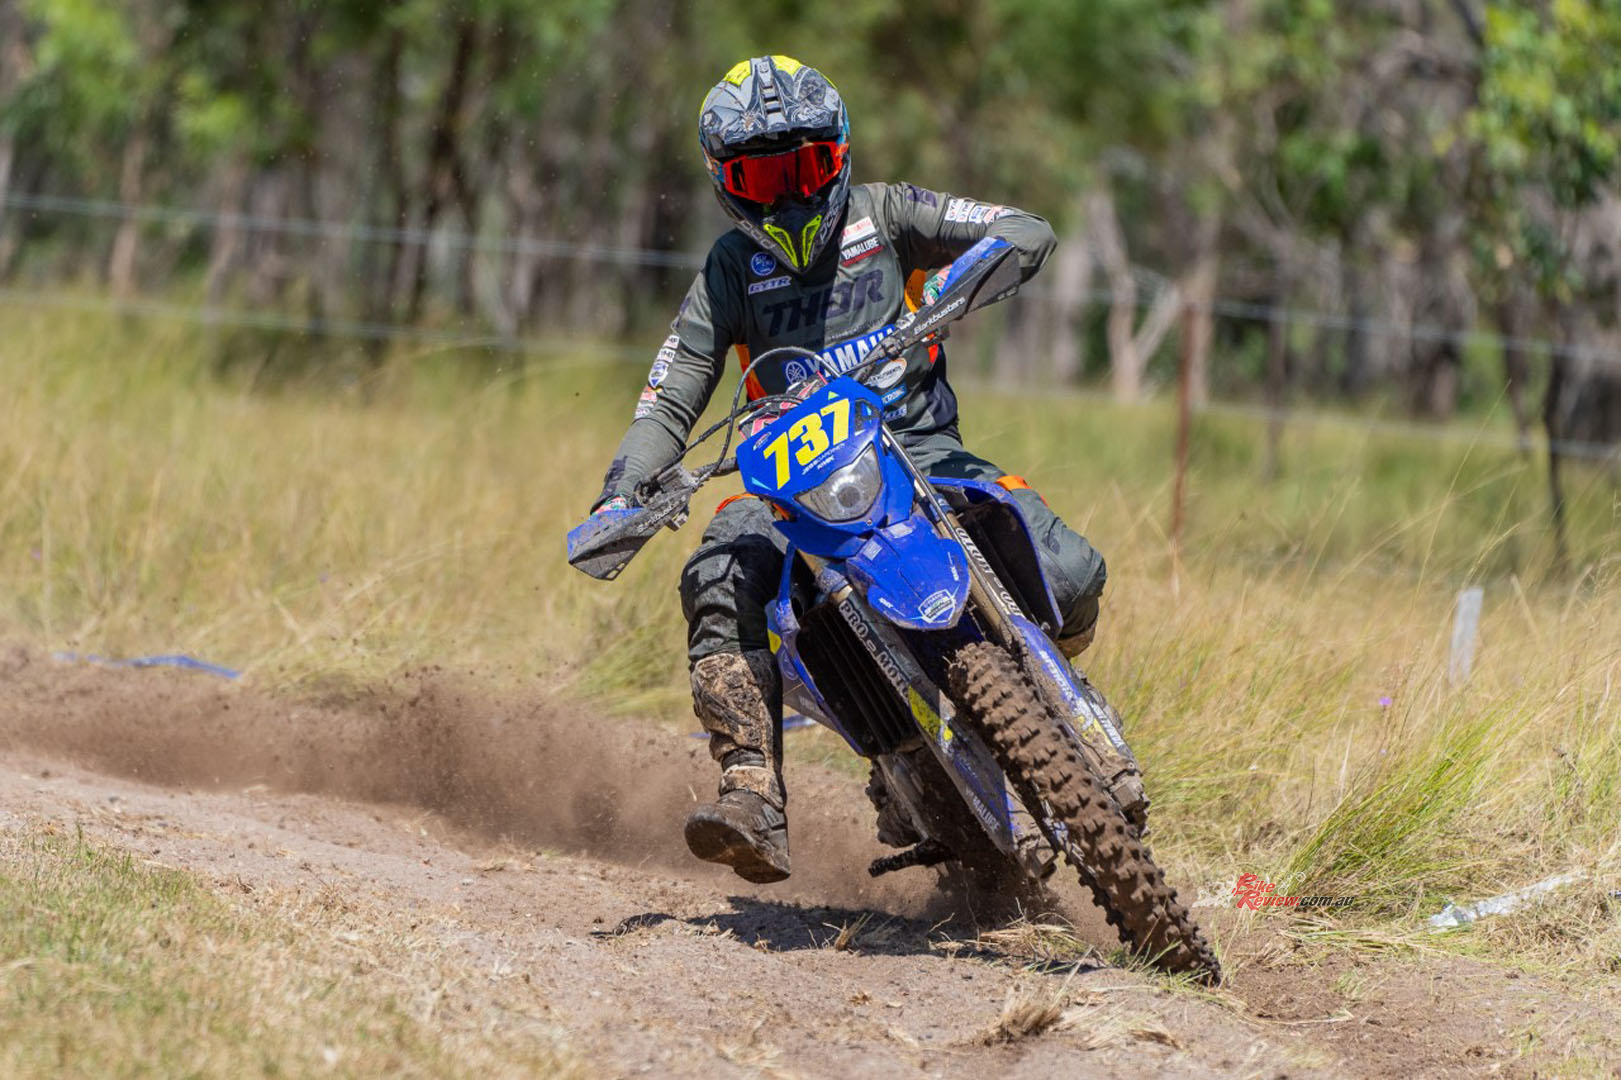 All three riders stood on the podium at the end of the opening weekend of racing at the Yamaha Australian Off-Road Championships (AORC), contested over the weekend.